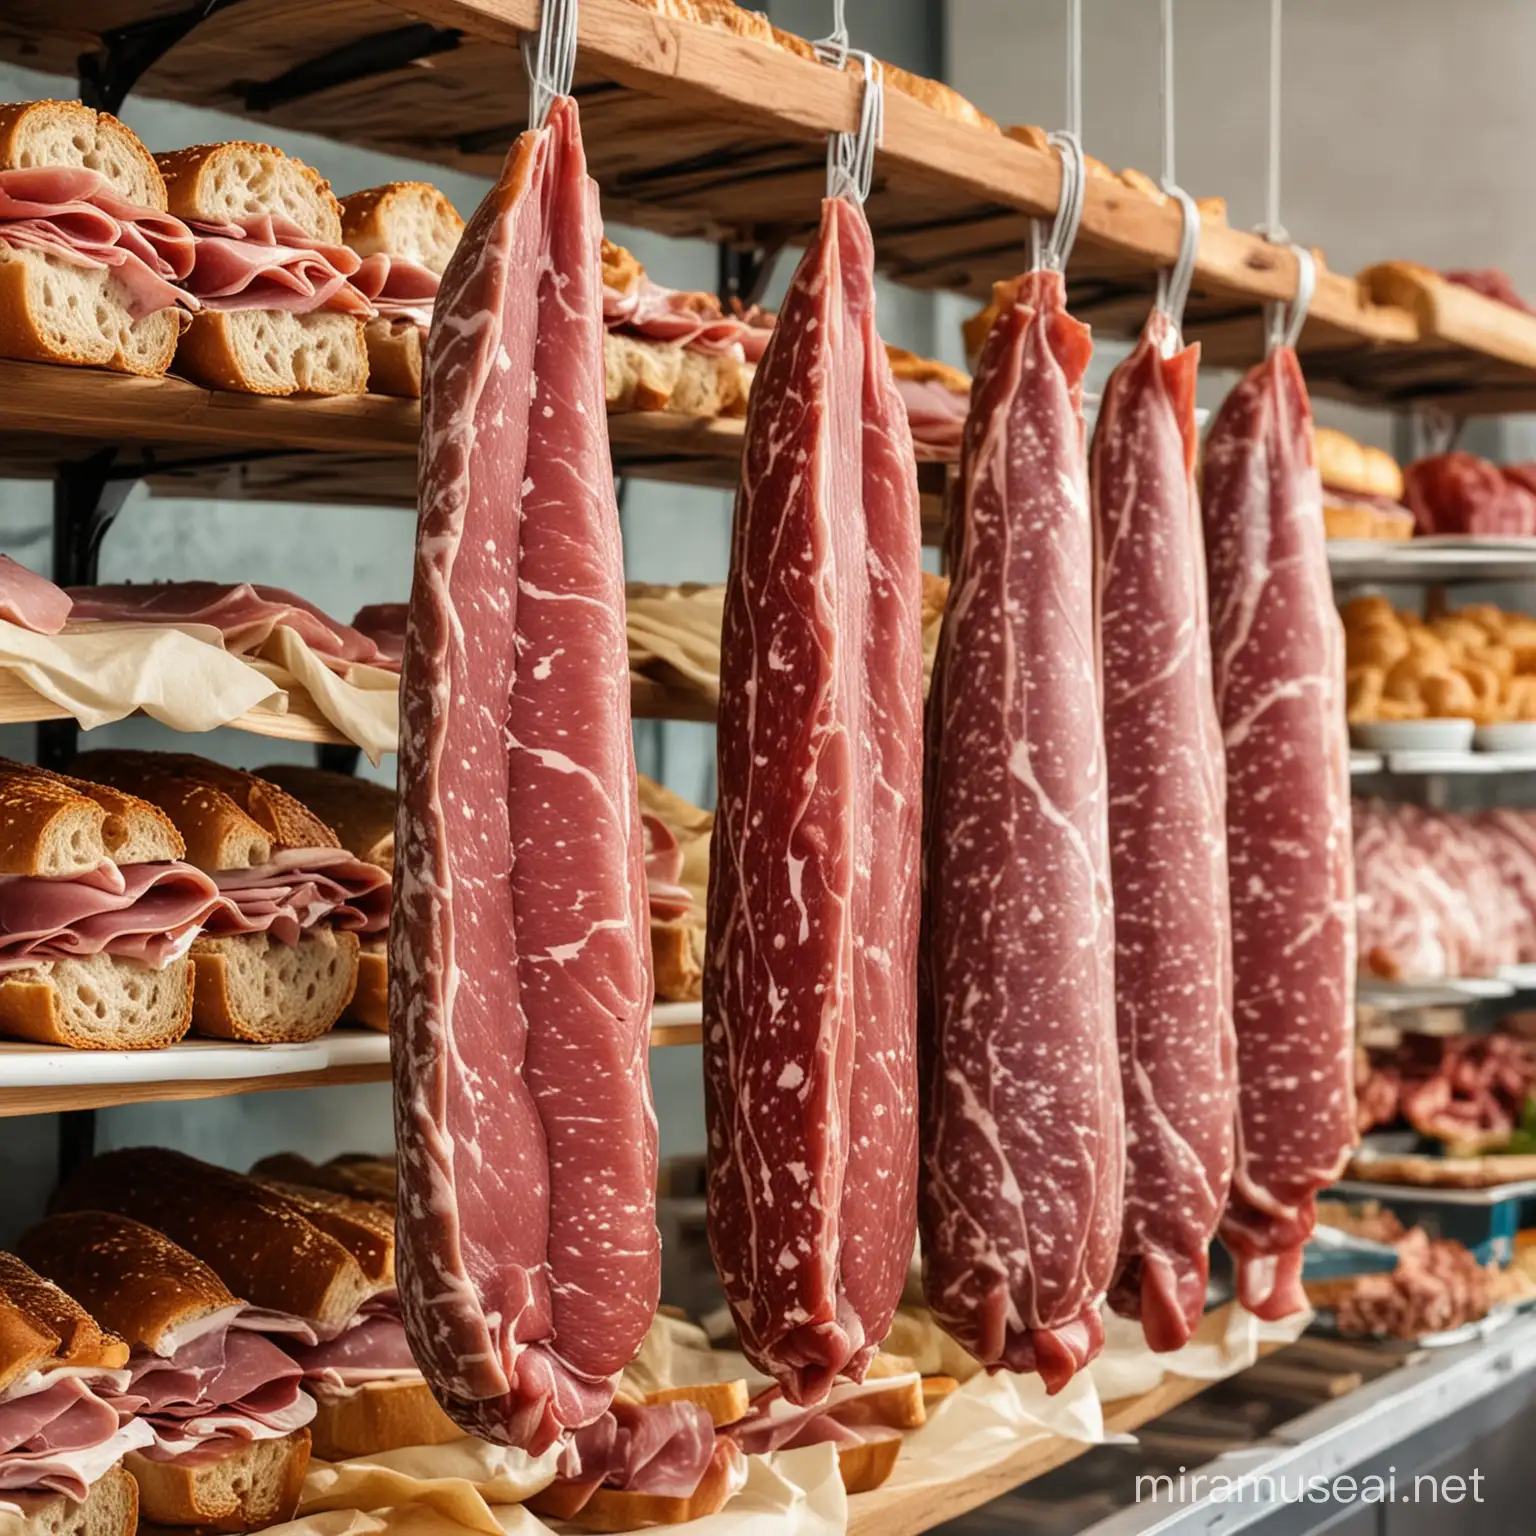 Artisanal Salami and Ham Display in a Charming Sandwich Shop